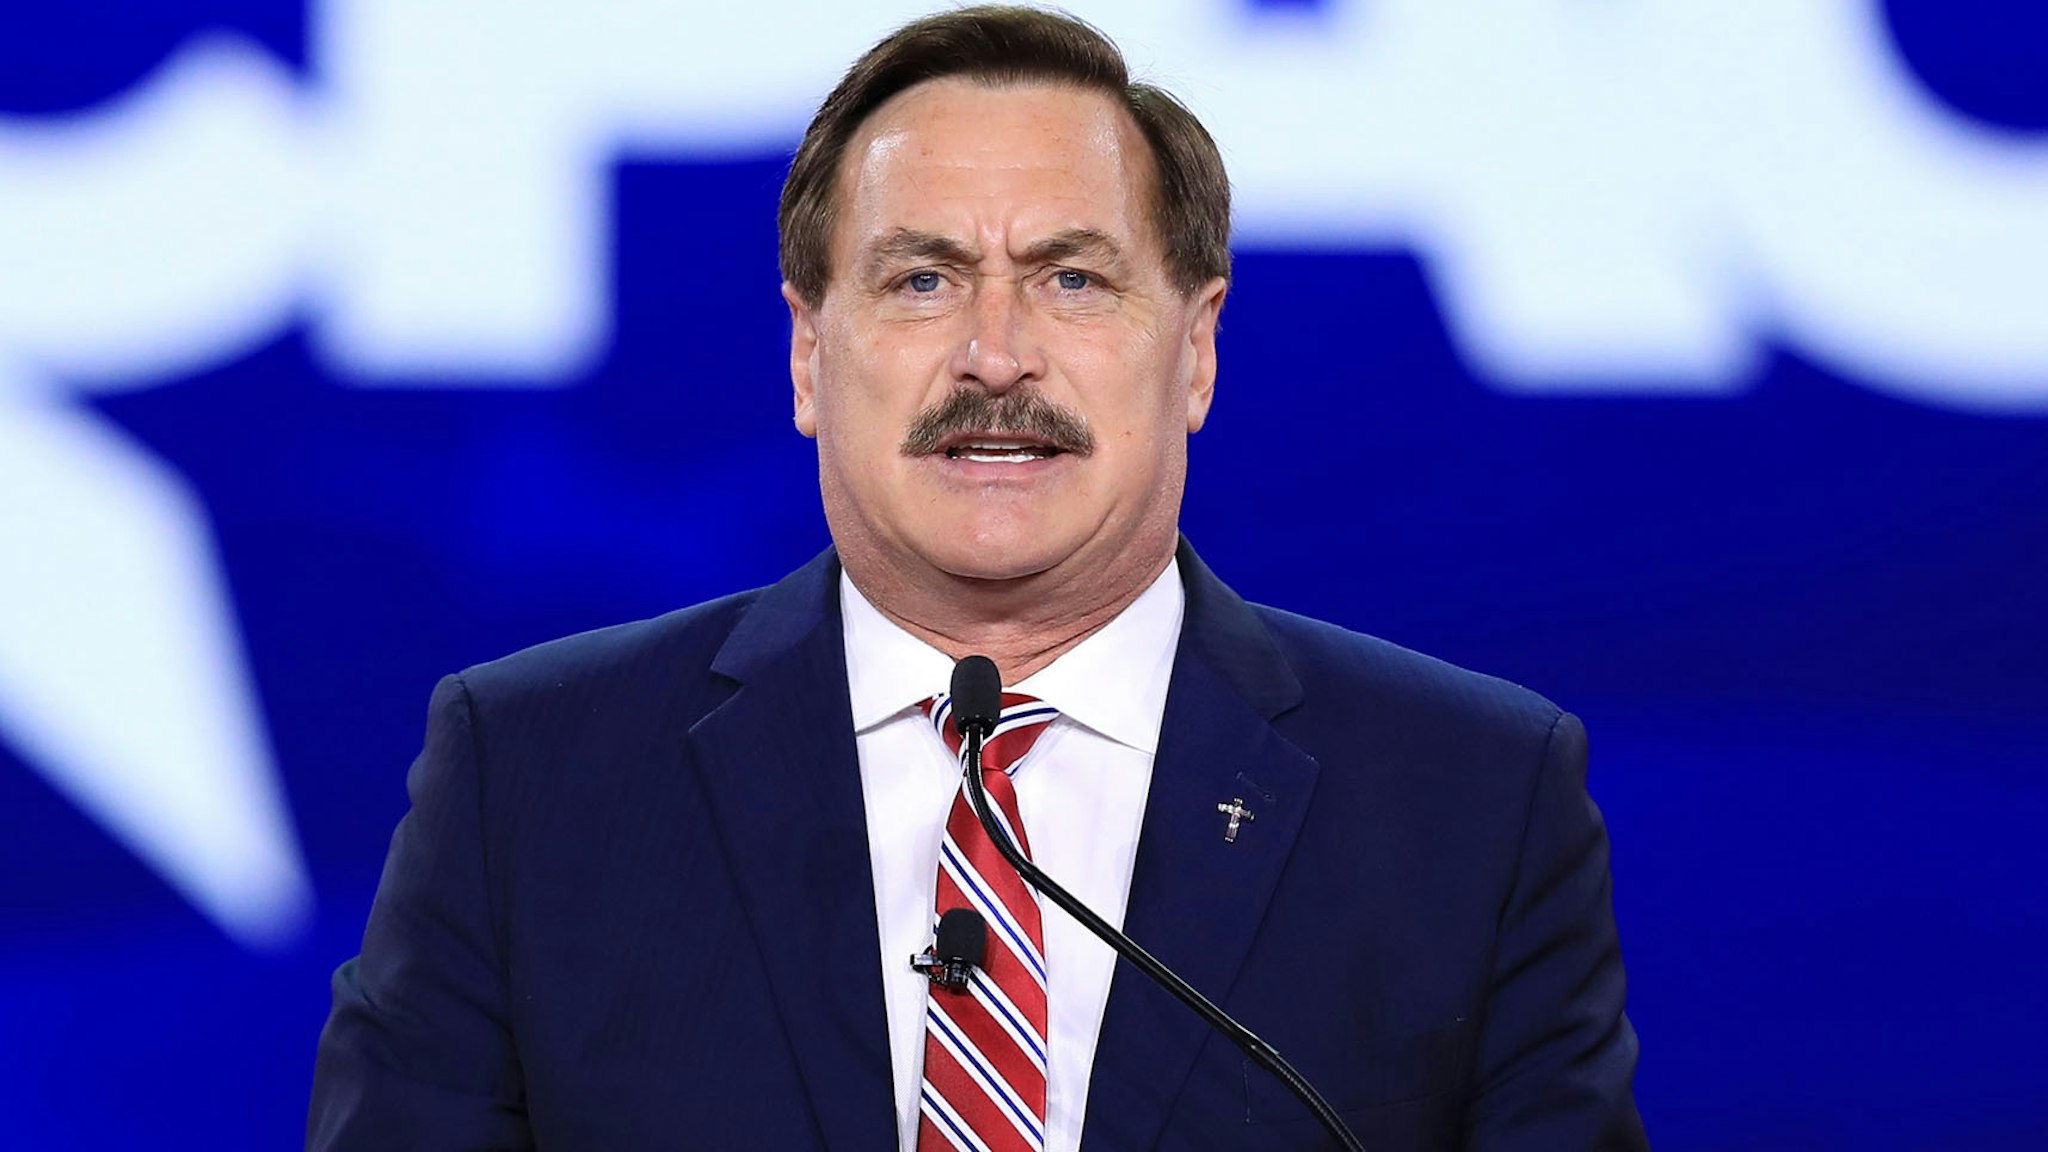 Mike Lindell, chief executive officer of My Pillow Inc., speaks during the Conservative Political Action Conference (CPAC) in Dallas, Texas, US, on Friday, Aug. 5, 2022. The Conservative Political Action Conference launched in 1974 brings together conservative organizations, elected leaders, and activists.